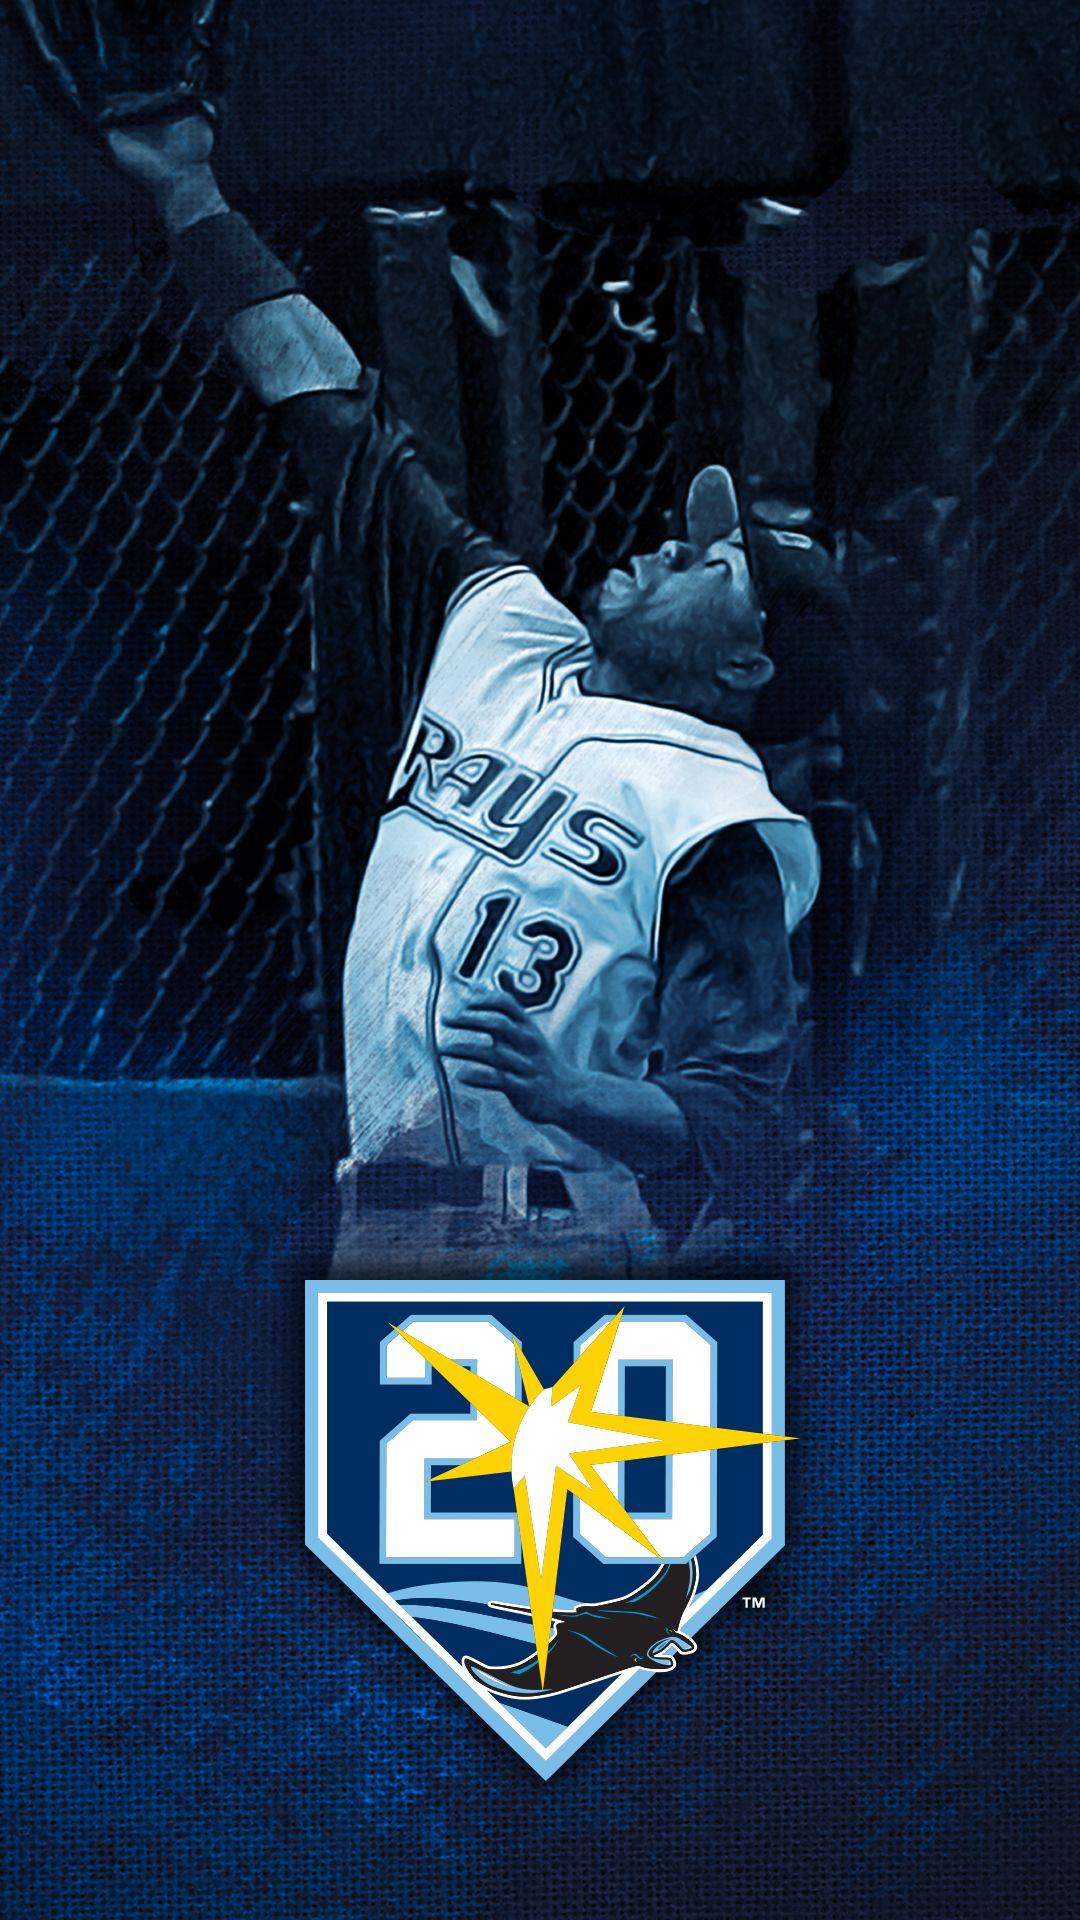 Tampa Bay Rays Wallpapers - Wallpaper Cave